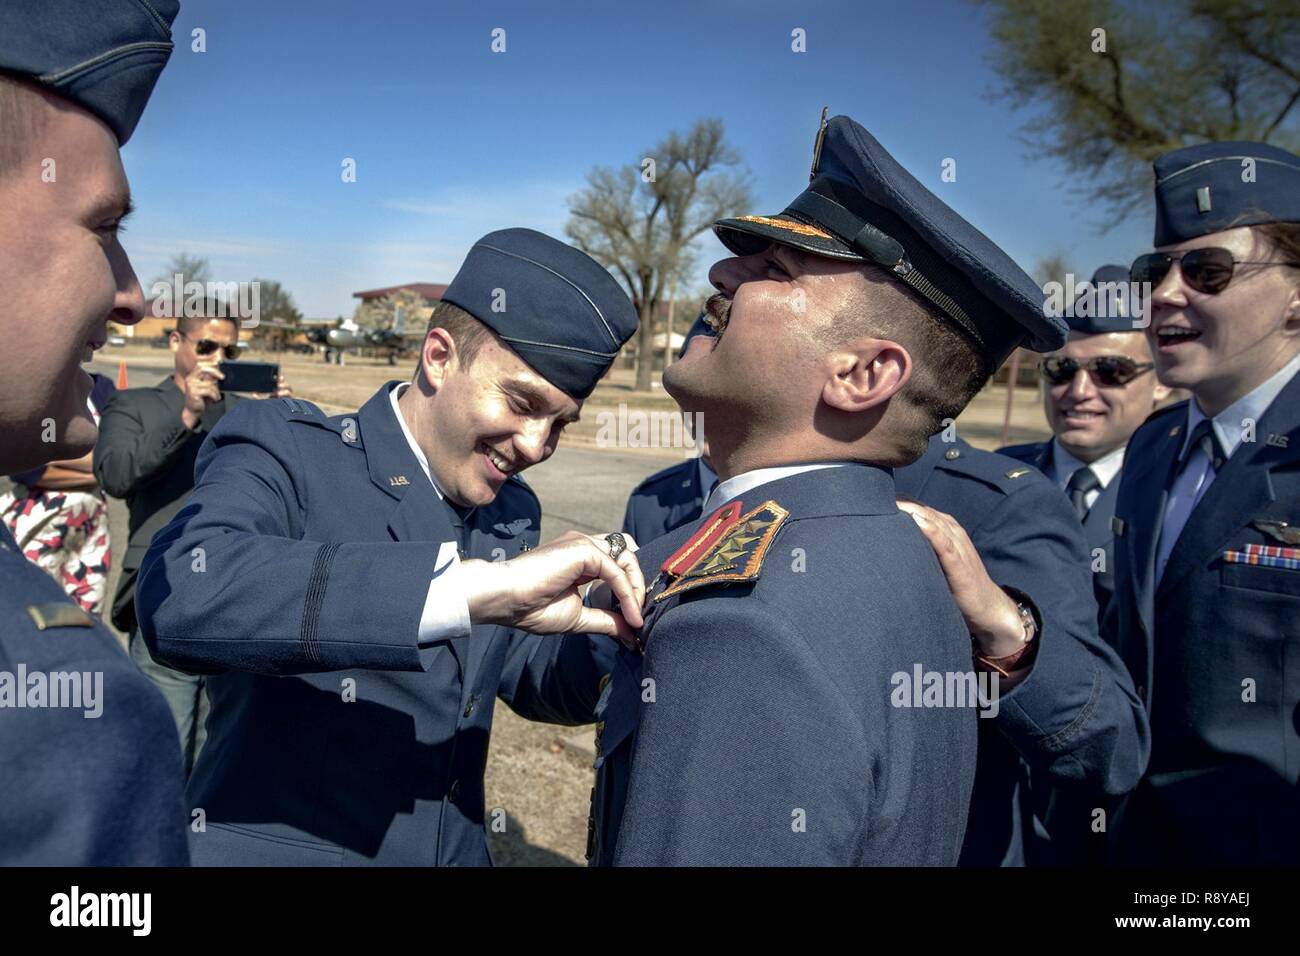 Specialized Undergraduate Pilot Training students gather to fasten pilot wings on their Iraqi Air Force classmate at Vance Air Force Base, Oklahoma, March 10. After approximately a year of training, Class 17-06 students received their wings during a morning ceremony. Stock Photo